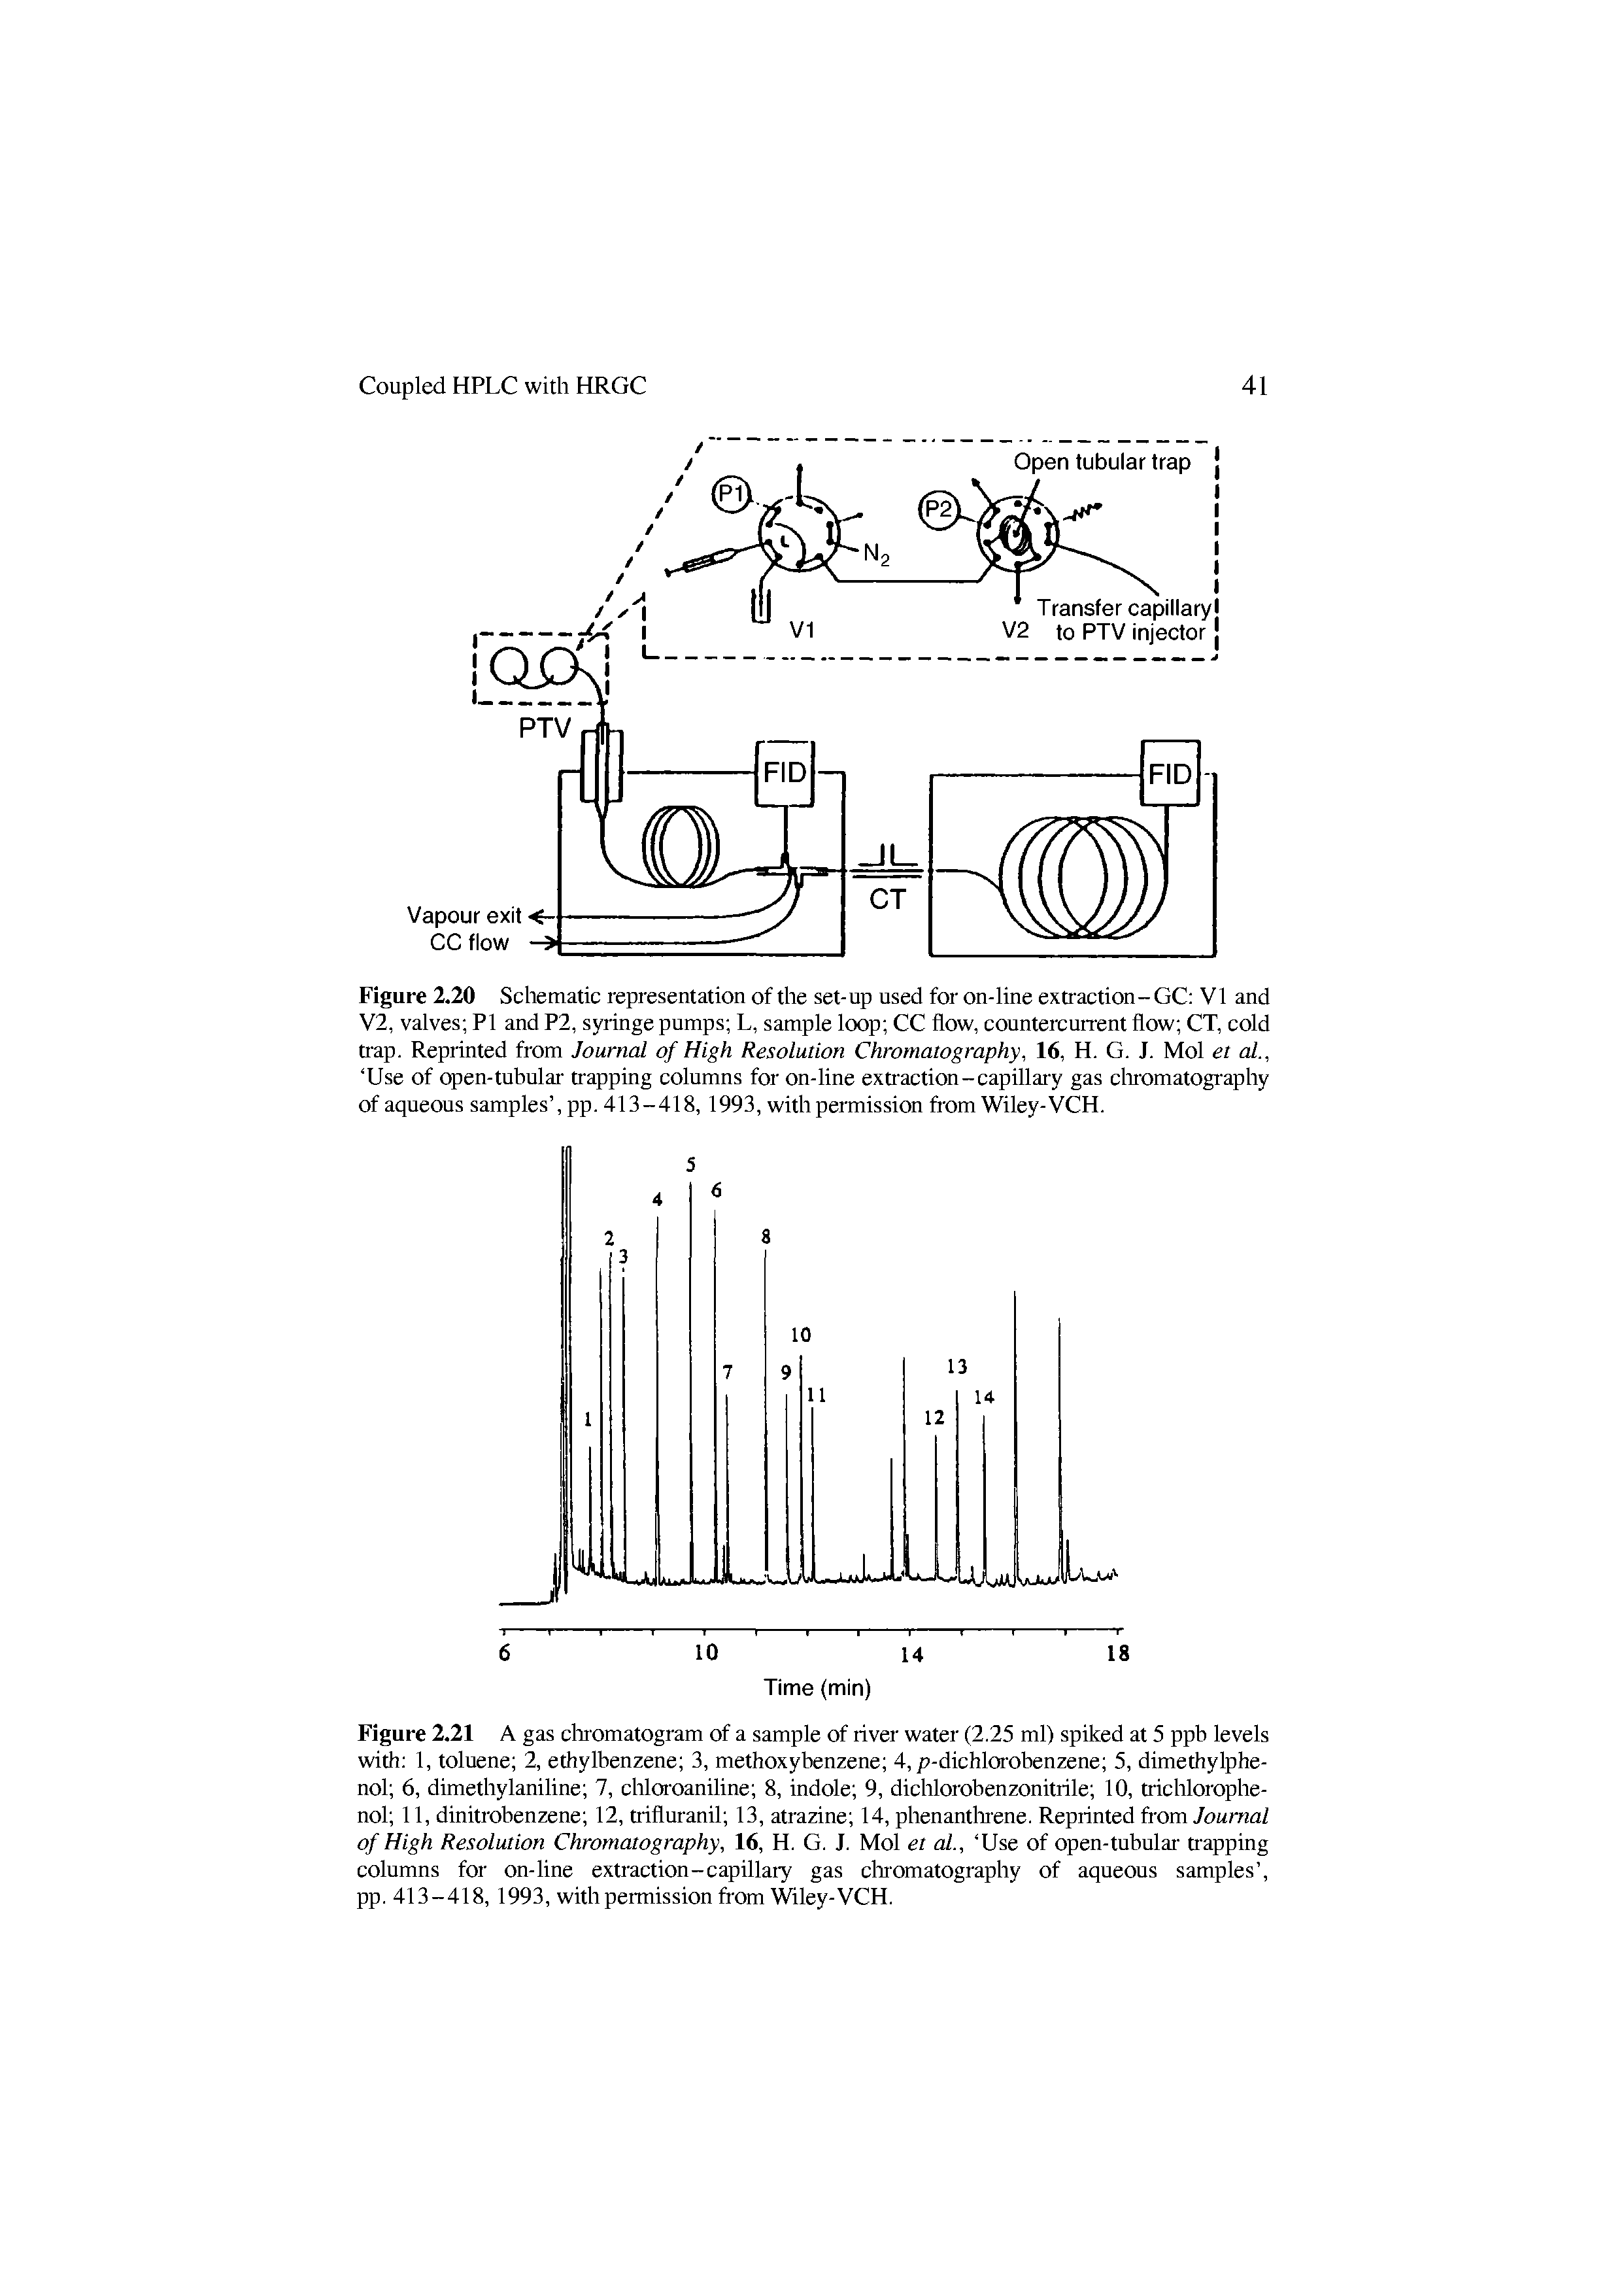 Figure 2.21 A gas cluomatogram of a sample of river water (2.25 ml) spiked at 5 ppb levels with 1, toluene 2, ethylbenzene 3, methoxybenzene 4, p-dichlorobenzene 5, dimethylphe-nol 6, dimethylaniline 7, chloroaniline 8, indole 9, dichlorobenzonitrile 10, tiichlorophe-nol 11, dinitrobenzene 12, tiifluranil 13, atrazine 14, phenantlnene. Reprinted from Journal of High Resolution Chromatography, 16, H. G. J. Mol et al., Use of open-tubular tapping columns for on-line extraction-capillary gas cluomatography of aqueous samples , pp. 413-418, 1993, with permission from Wiley-VCH.